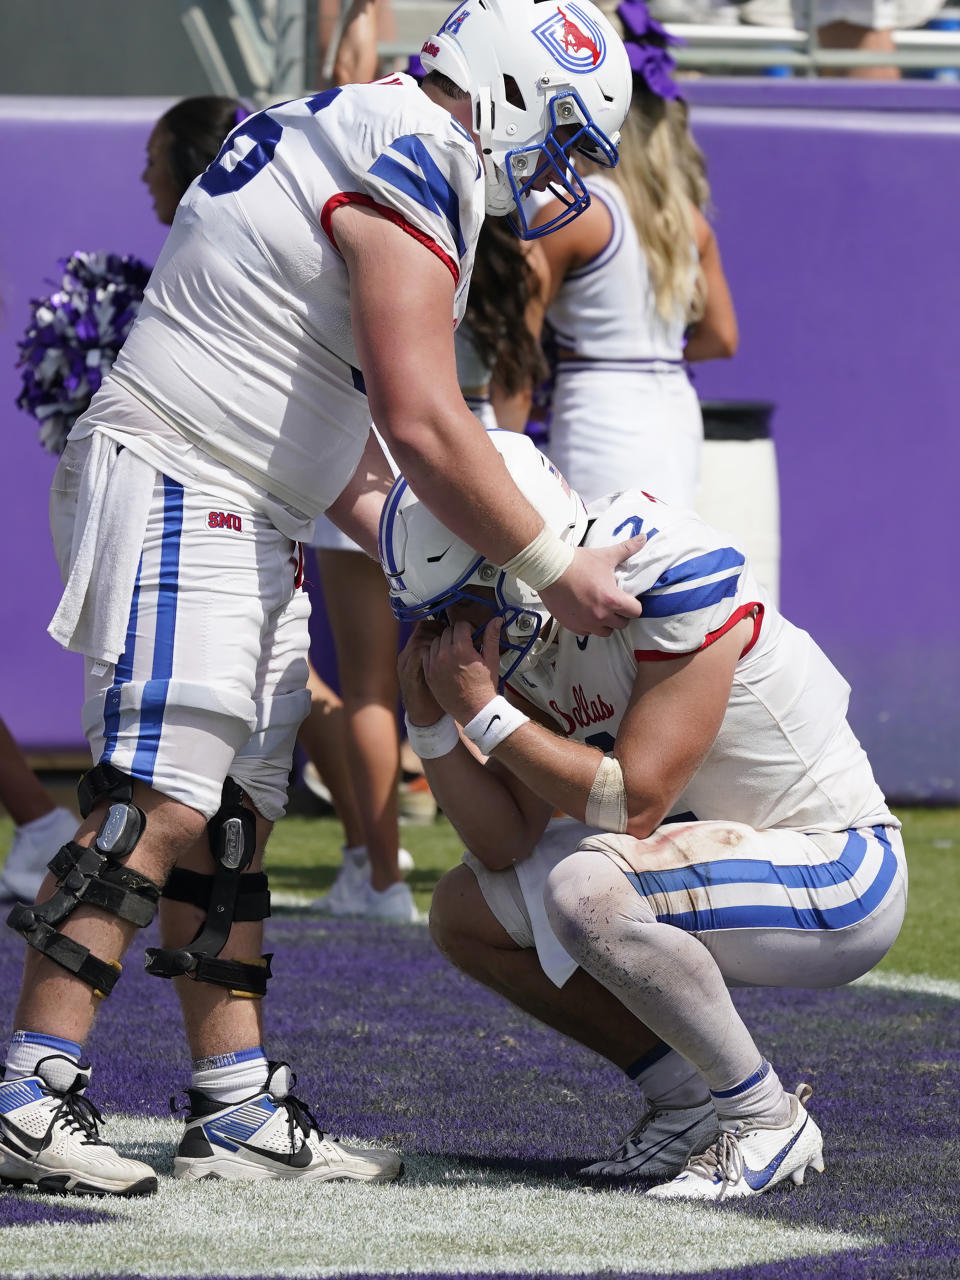 SMU quarterback Preston Stone (2) is comforted by teammate lineman Branson Hickman after an NCAA college football game against TCU, Saturday, Sept. 23, 2023, in Fort Worth, Texas. (AP Photo/LM Otero)